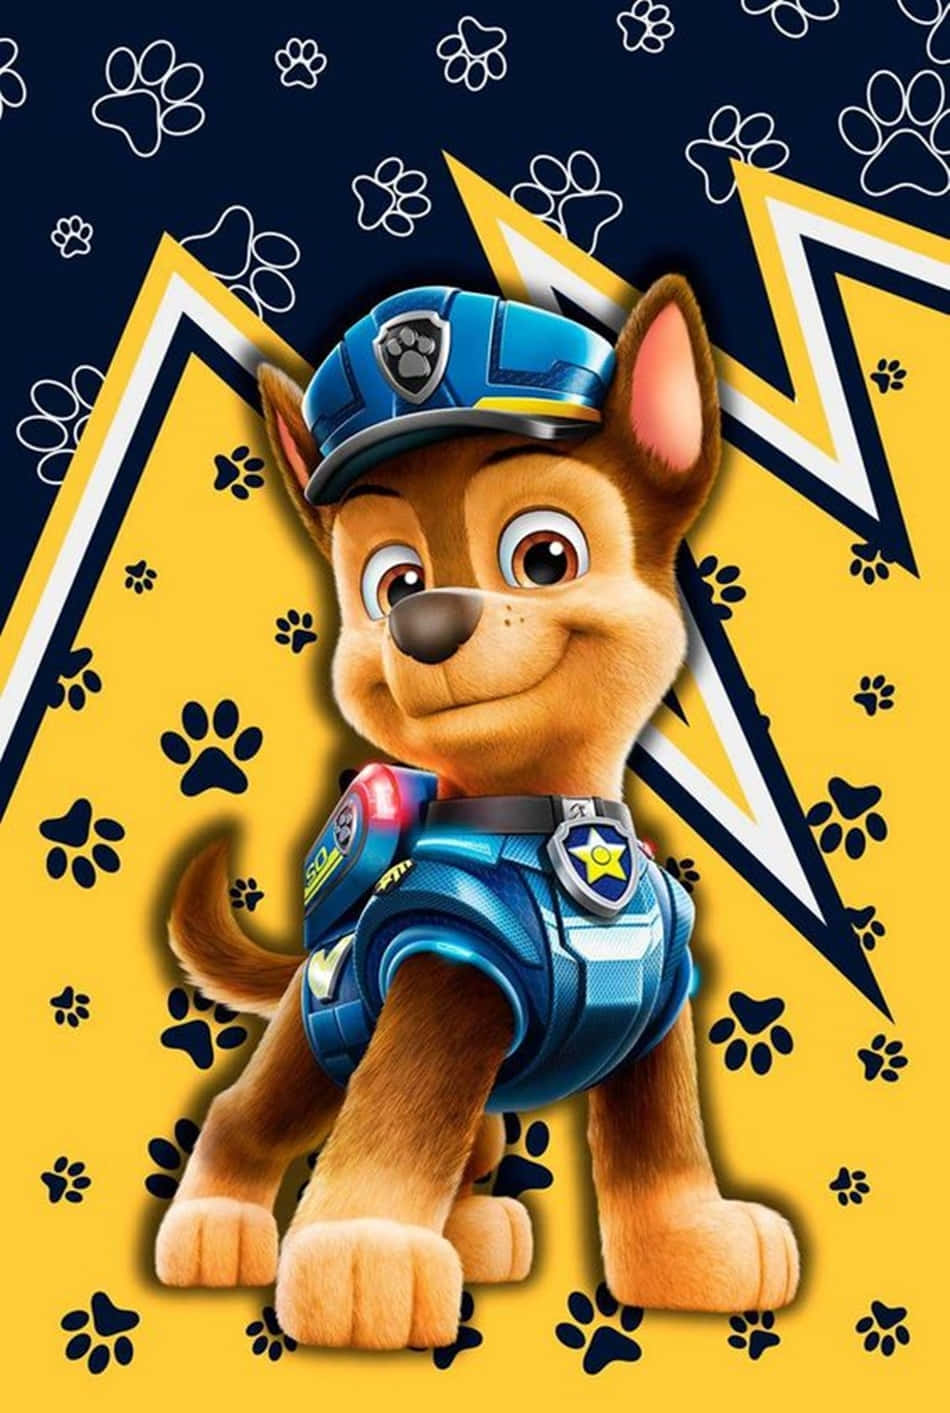 Chase the Dalmatian pup from Paw Patrol is ready for action! Wallpaper